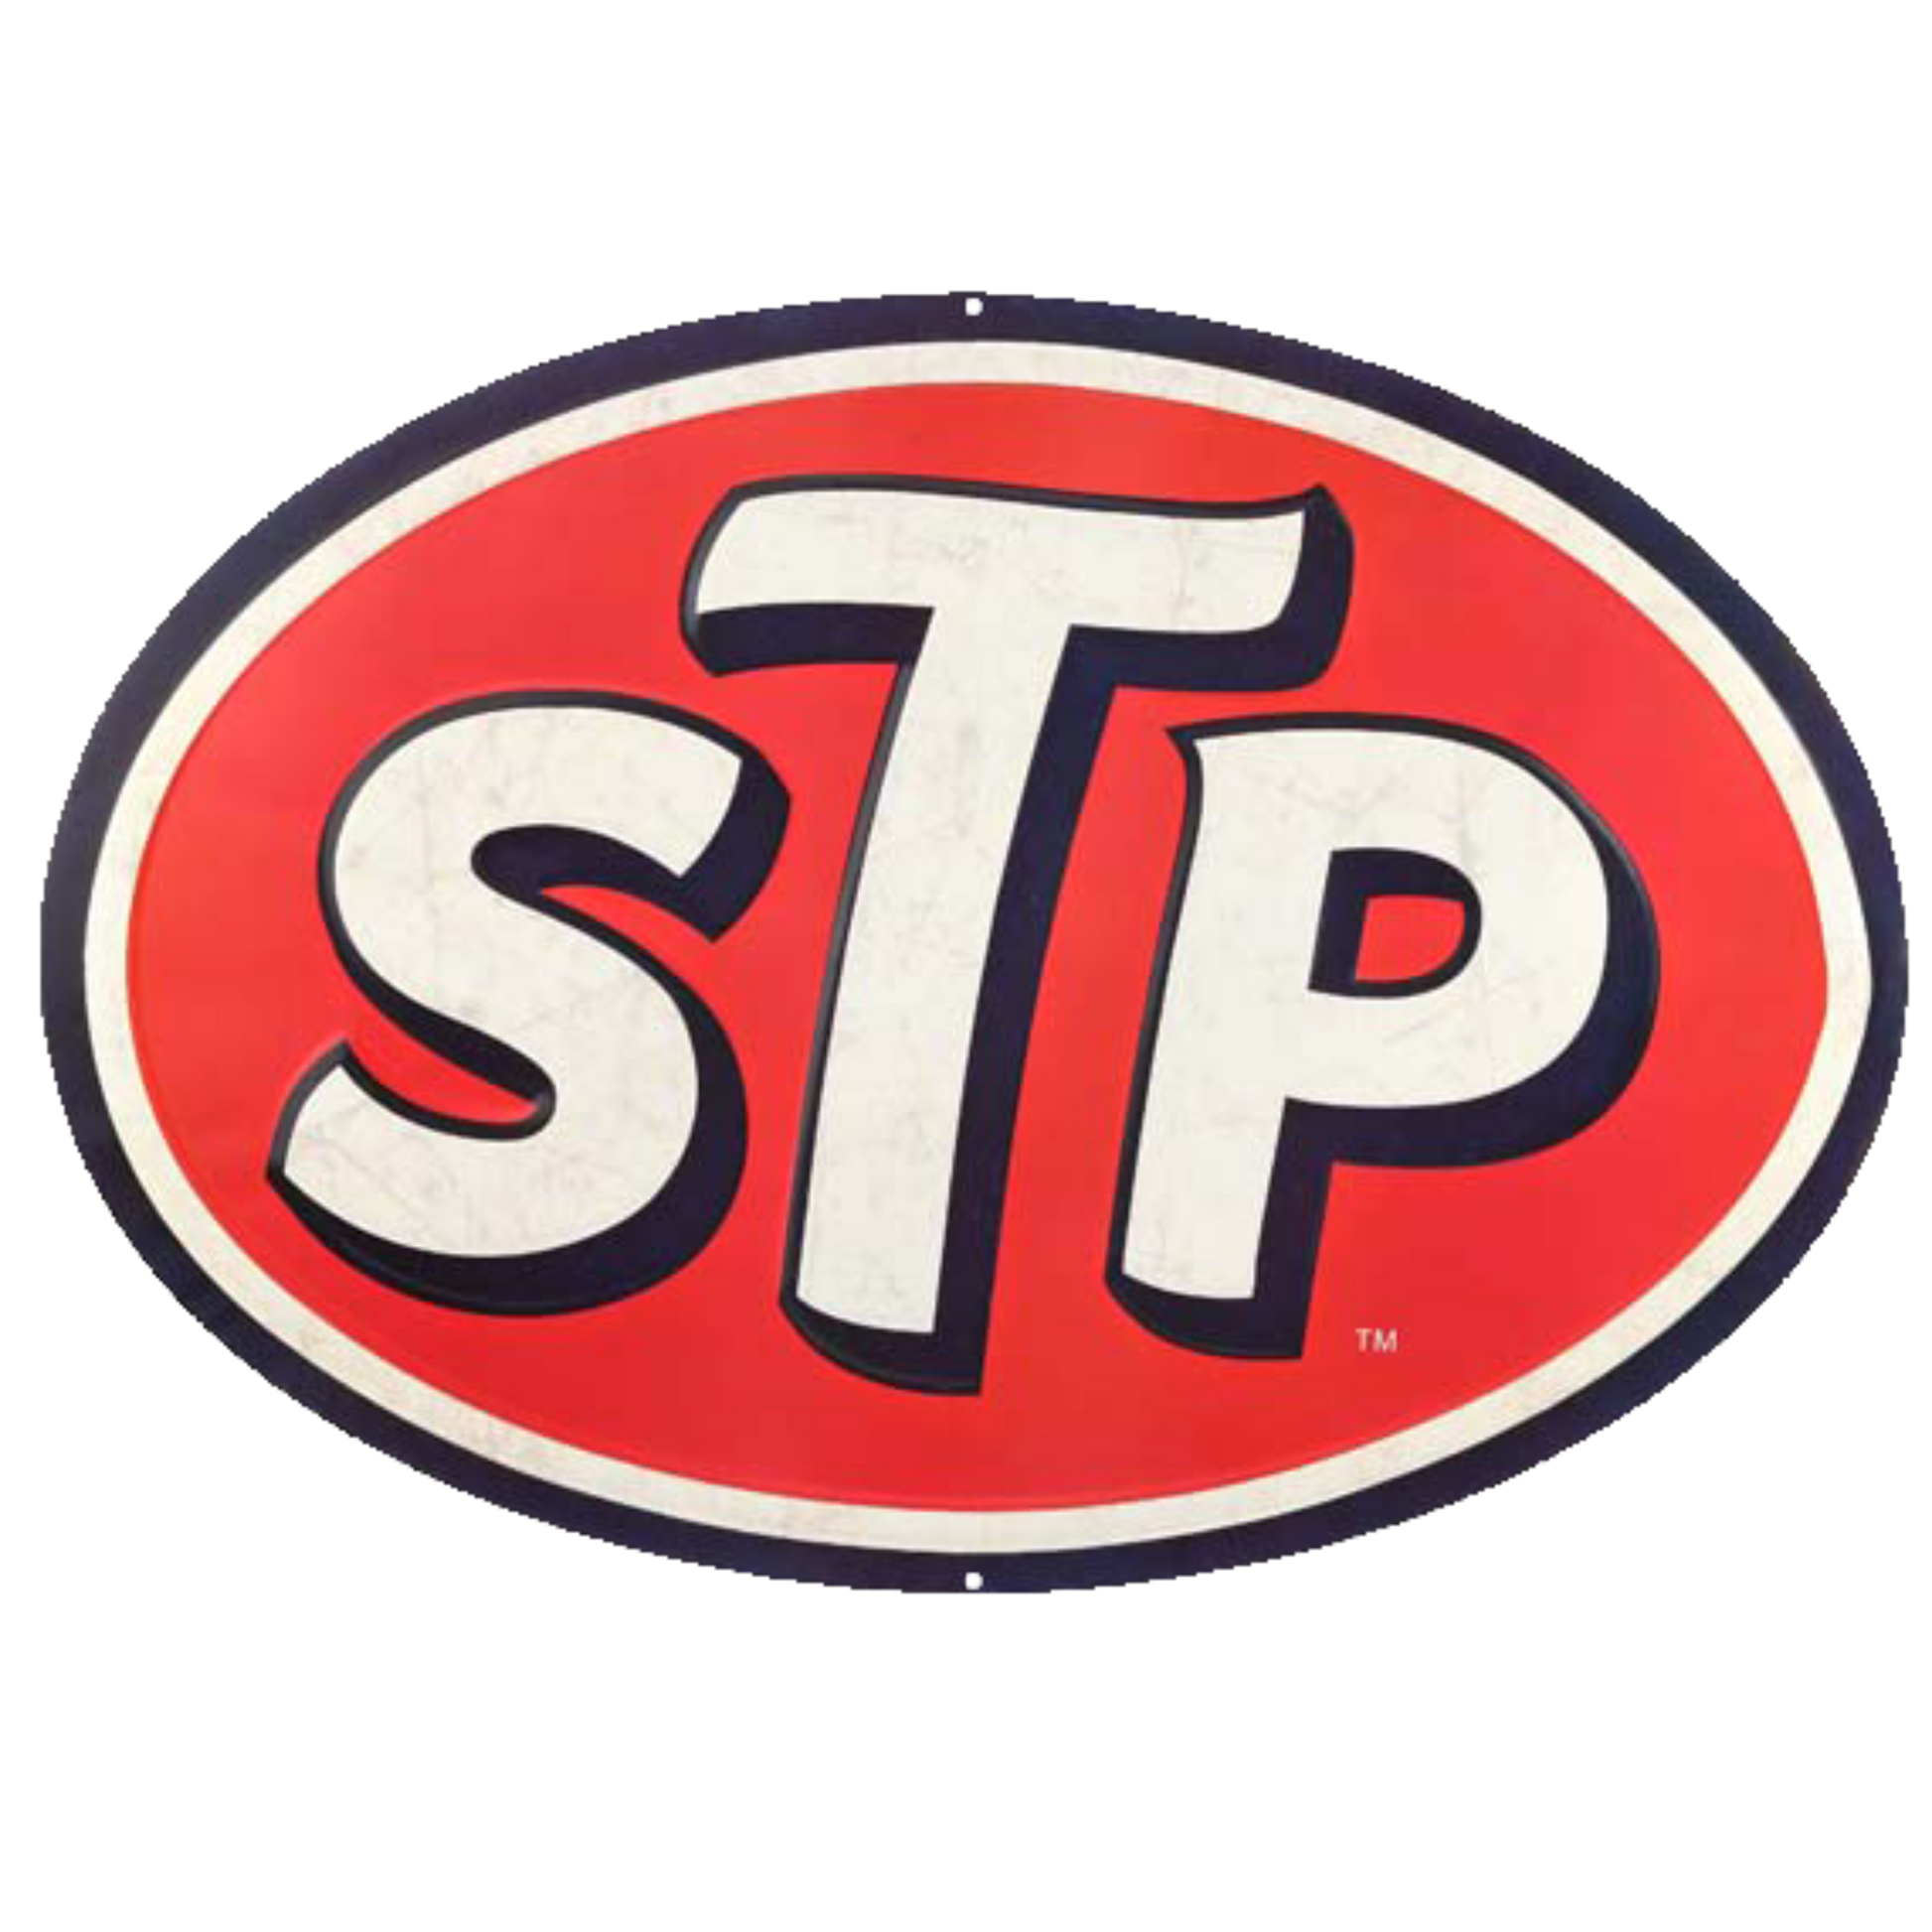 Oval red metal sign with the embossed STP logo in bold white and black letters.